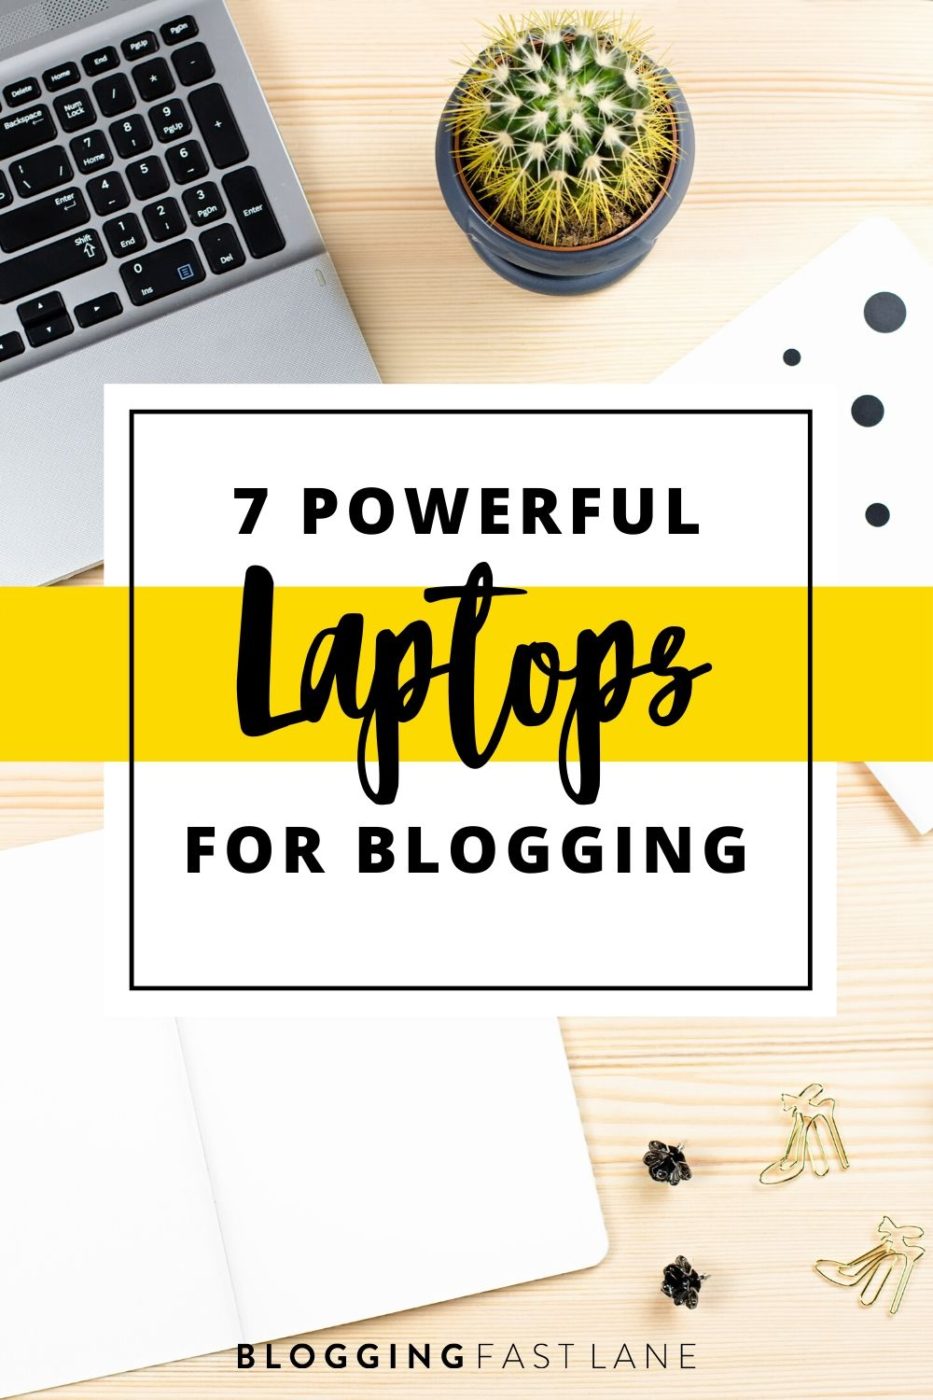 Best Laptops for Blogging | Ready to find the best laptop for blogging? Check out our 7 recommendations and key considerations to keep in mind before buying!